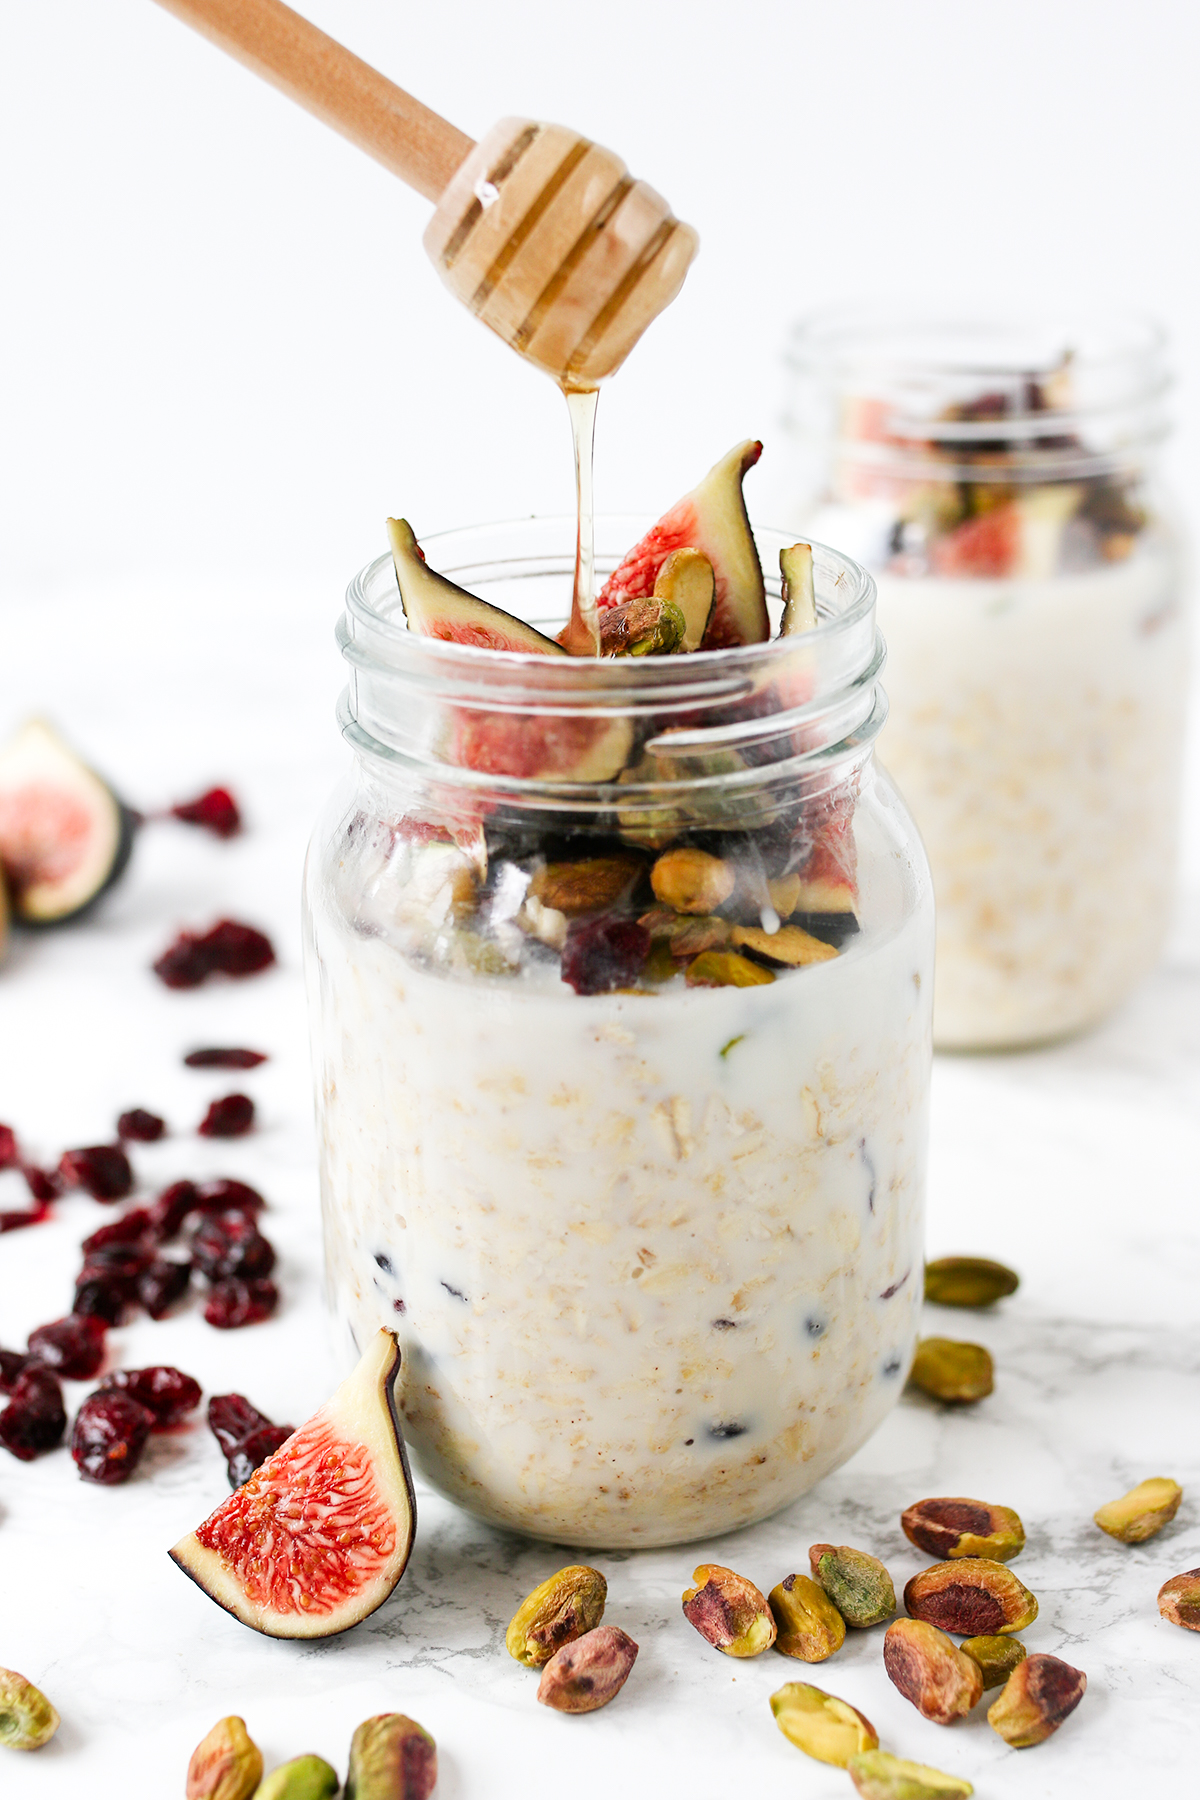 Fruit and Nut Overnight Oats - A hearty-yet-healthy breakfast you can make ahead!